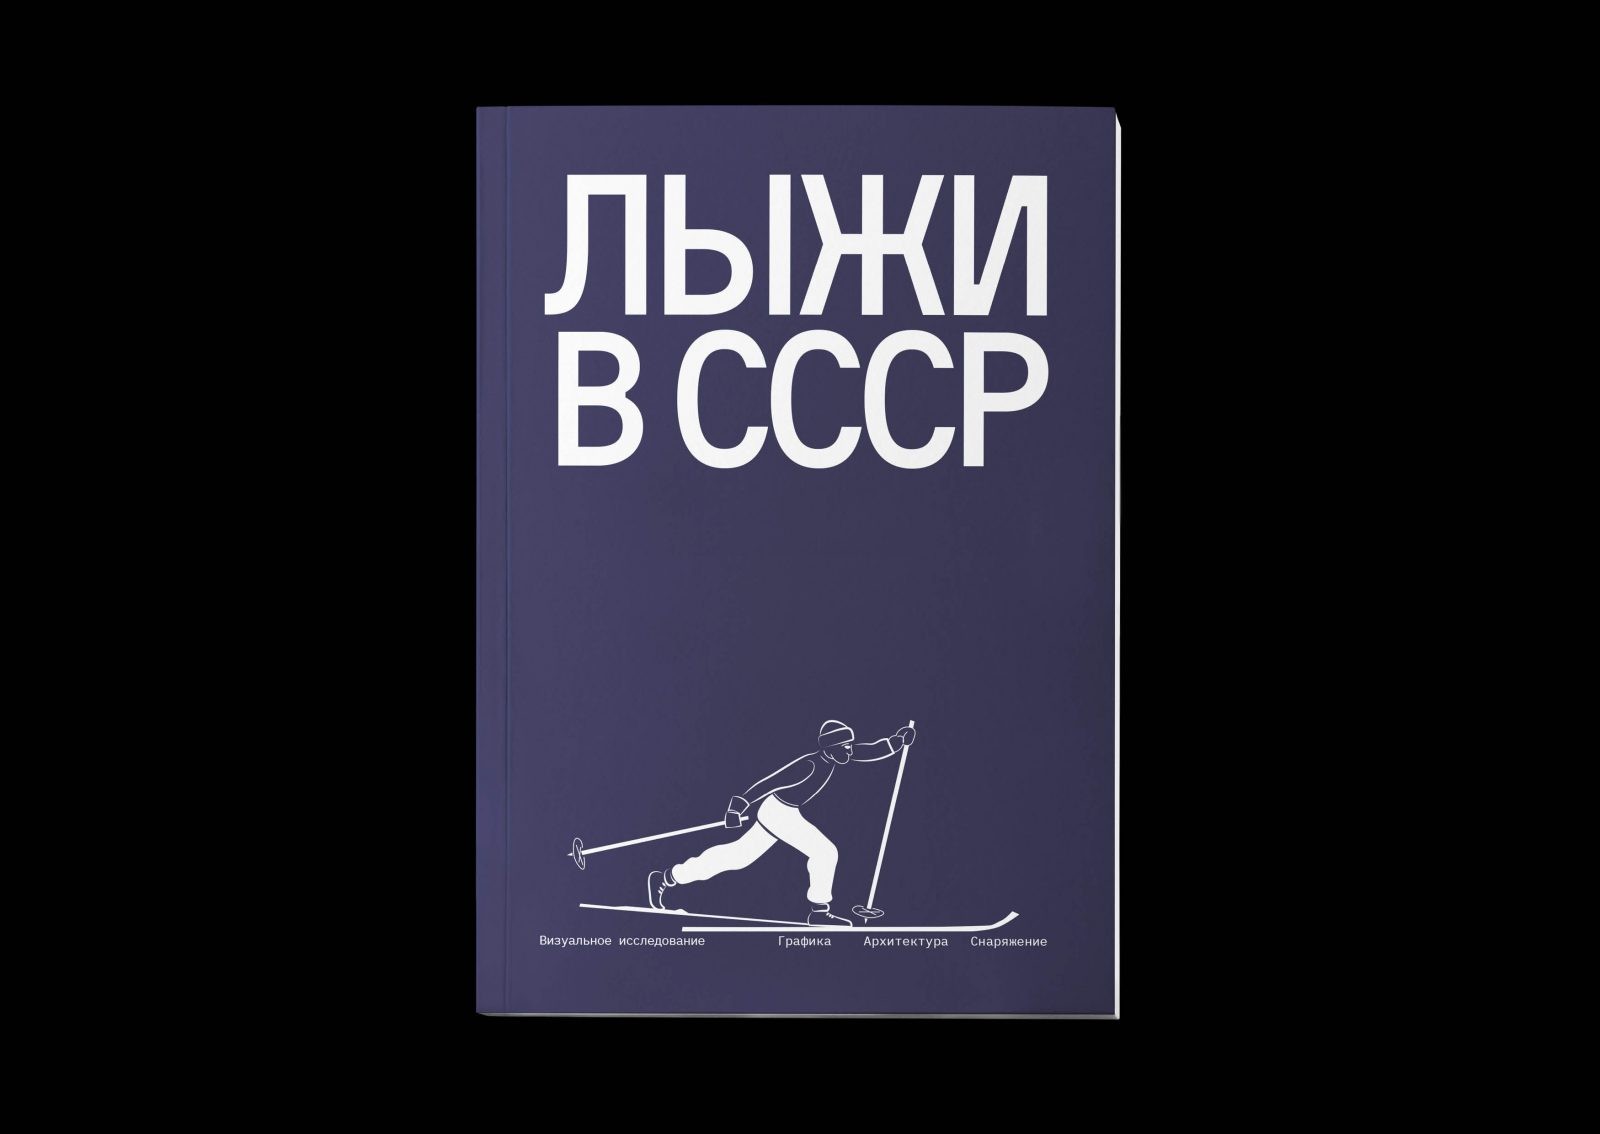 Visual Research About the Skiing in the USSR by Student Fedor Shchepin